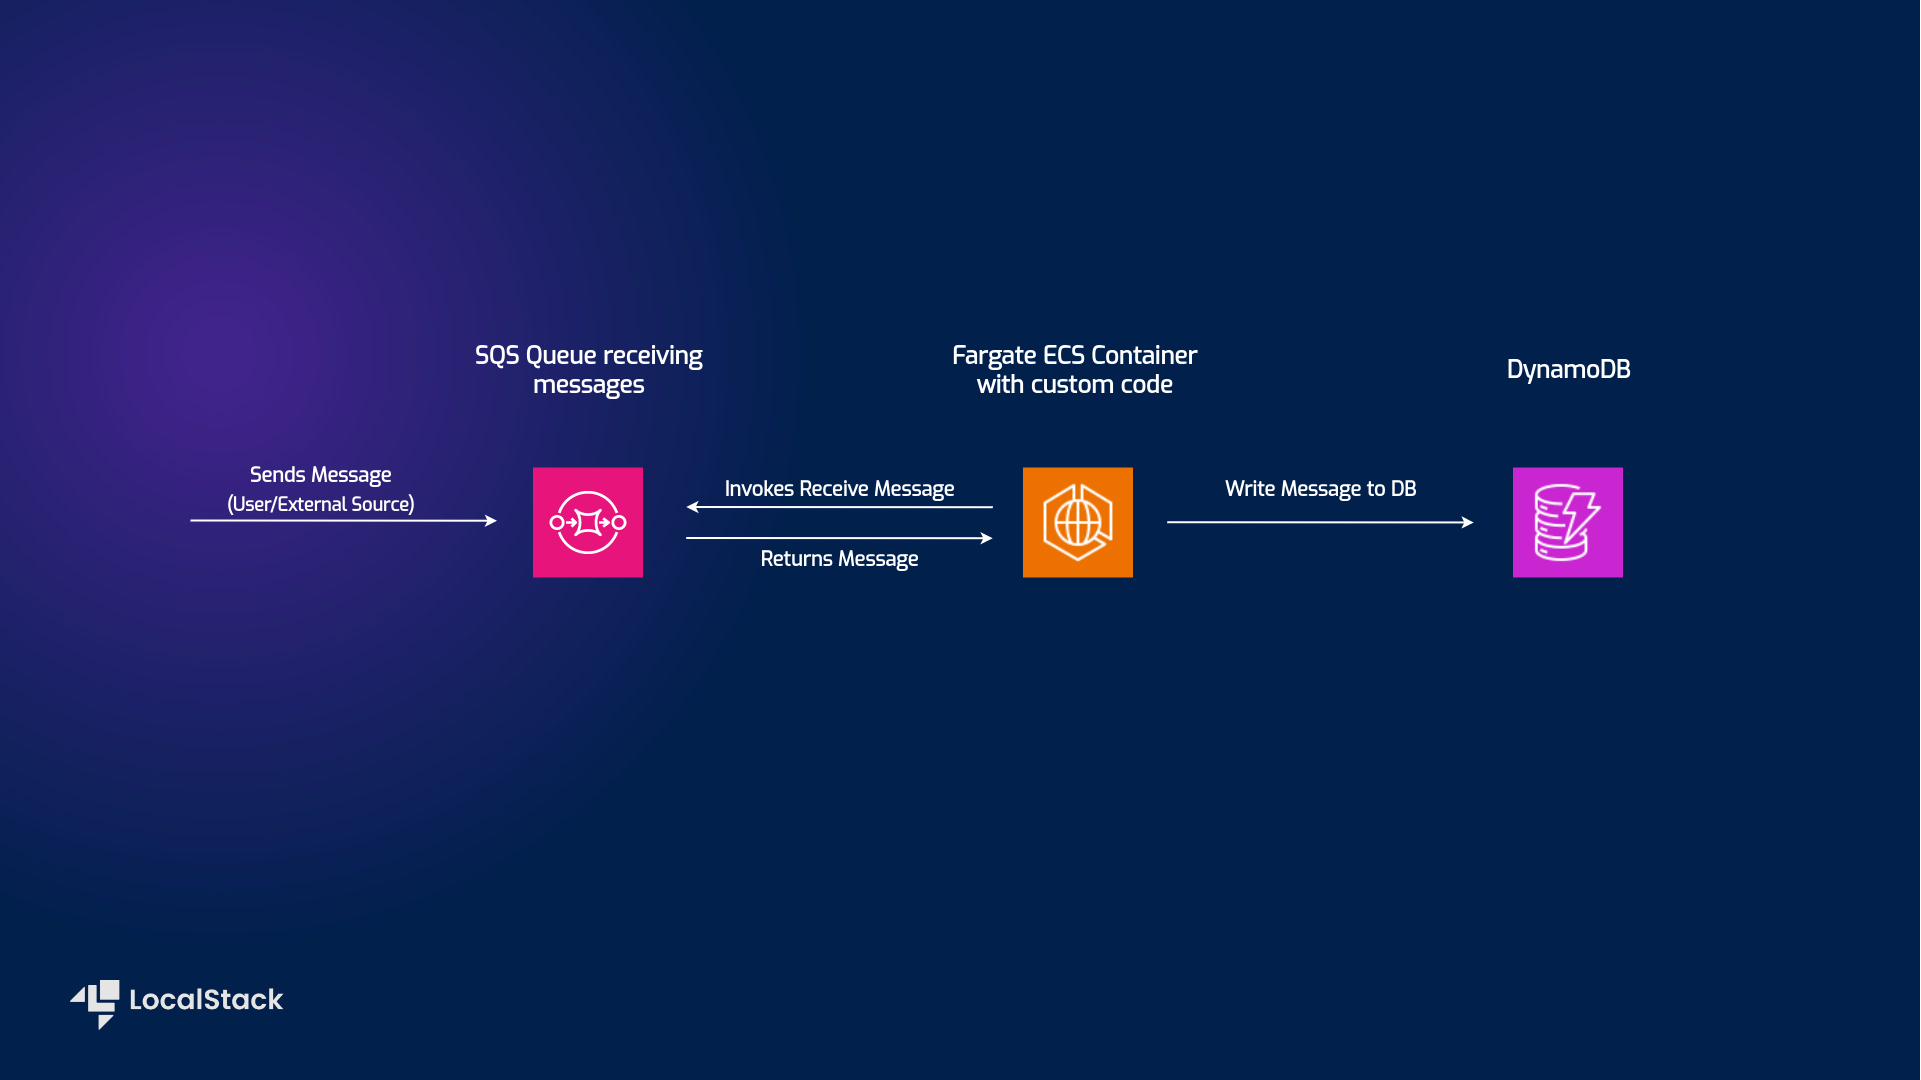 LocalStack Fargate Messaging Processing application with AWS SQS, DynamoDB, and Fargate